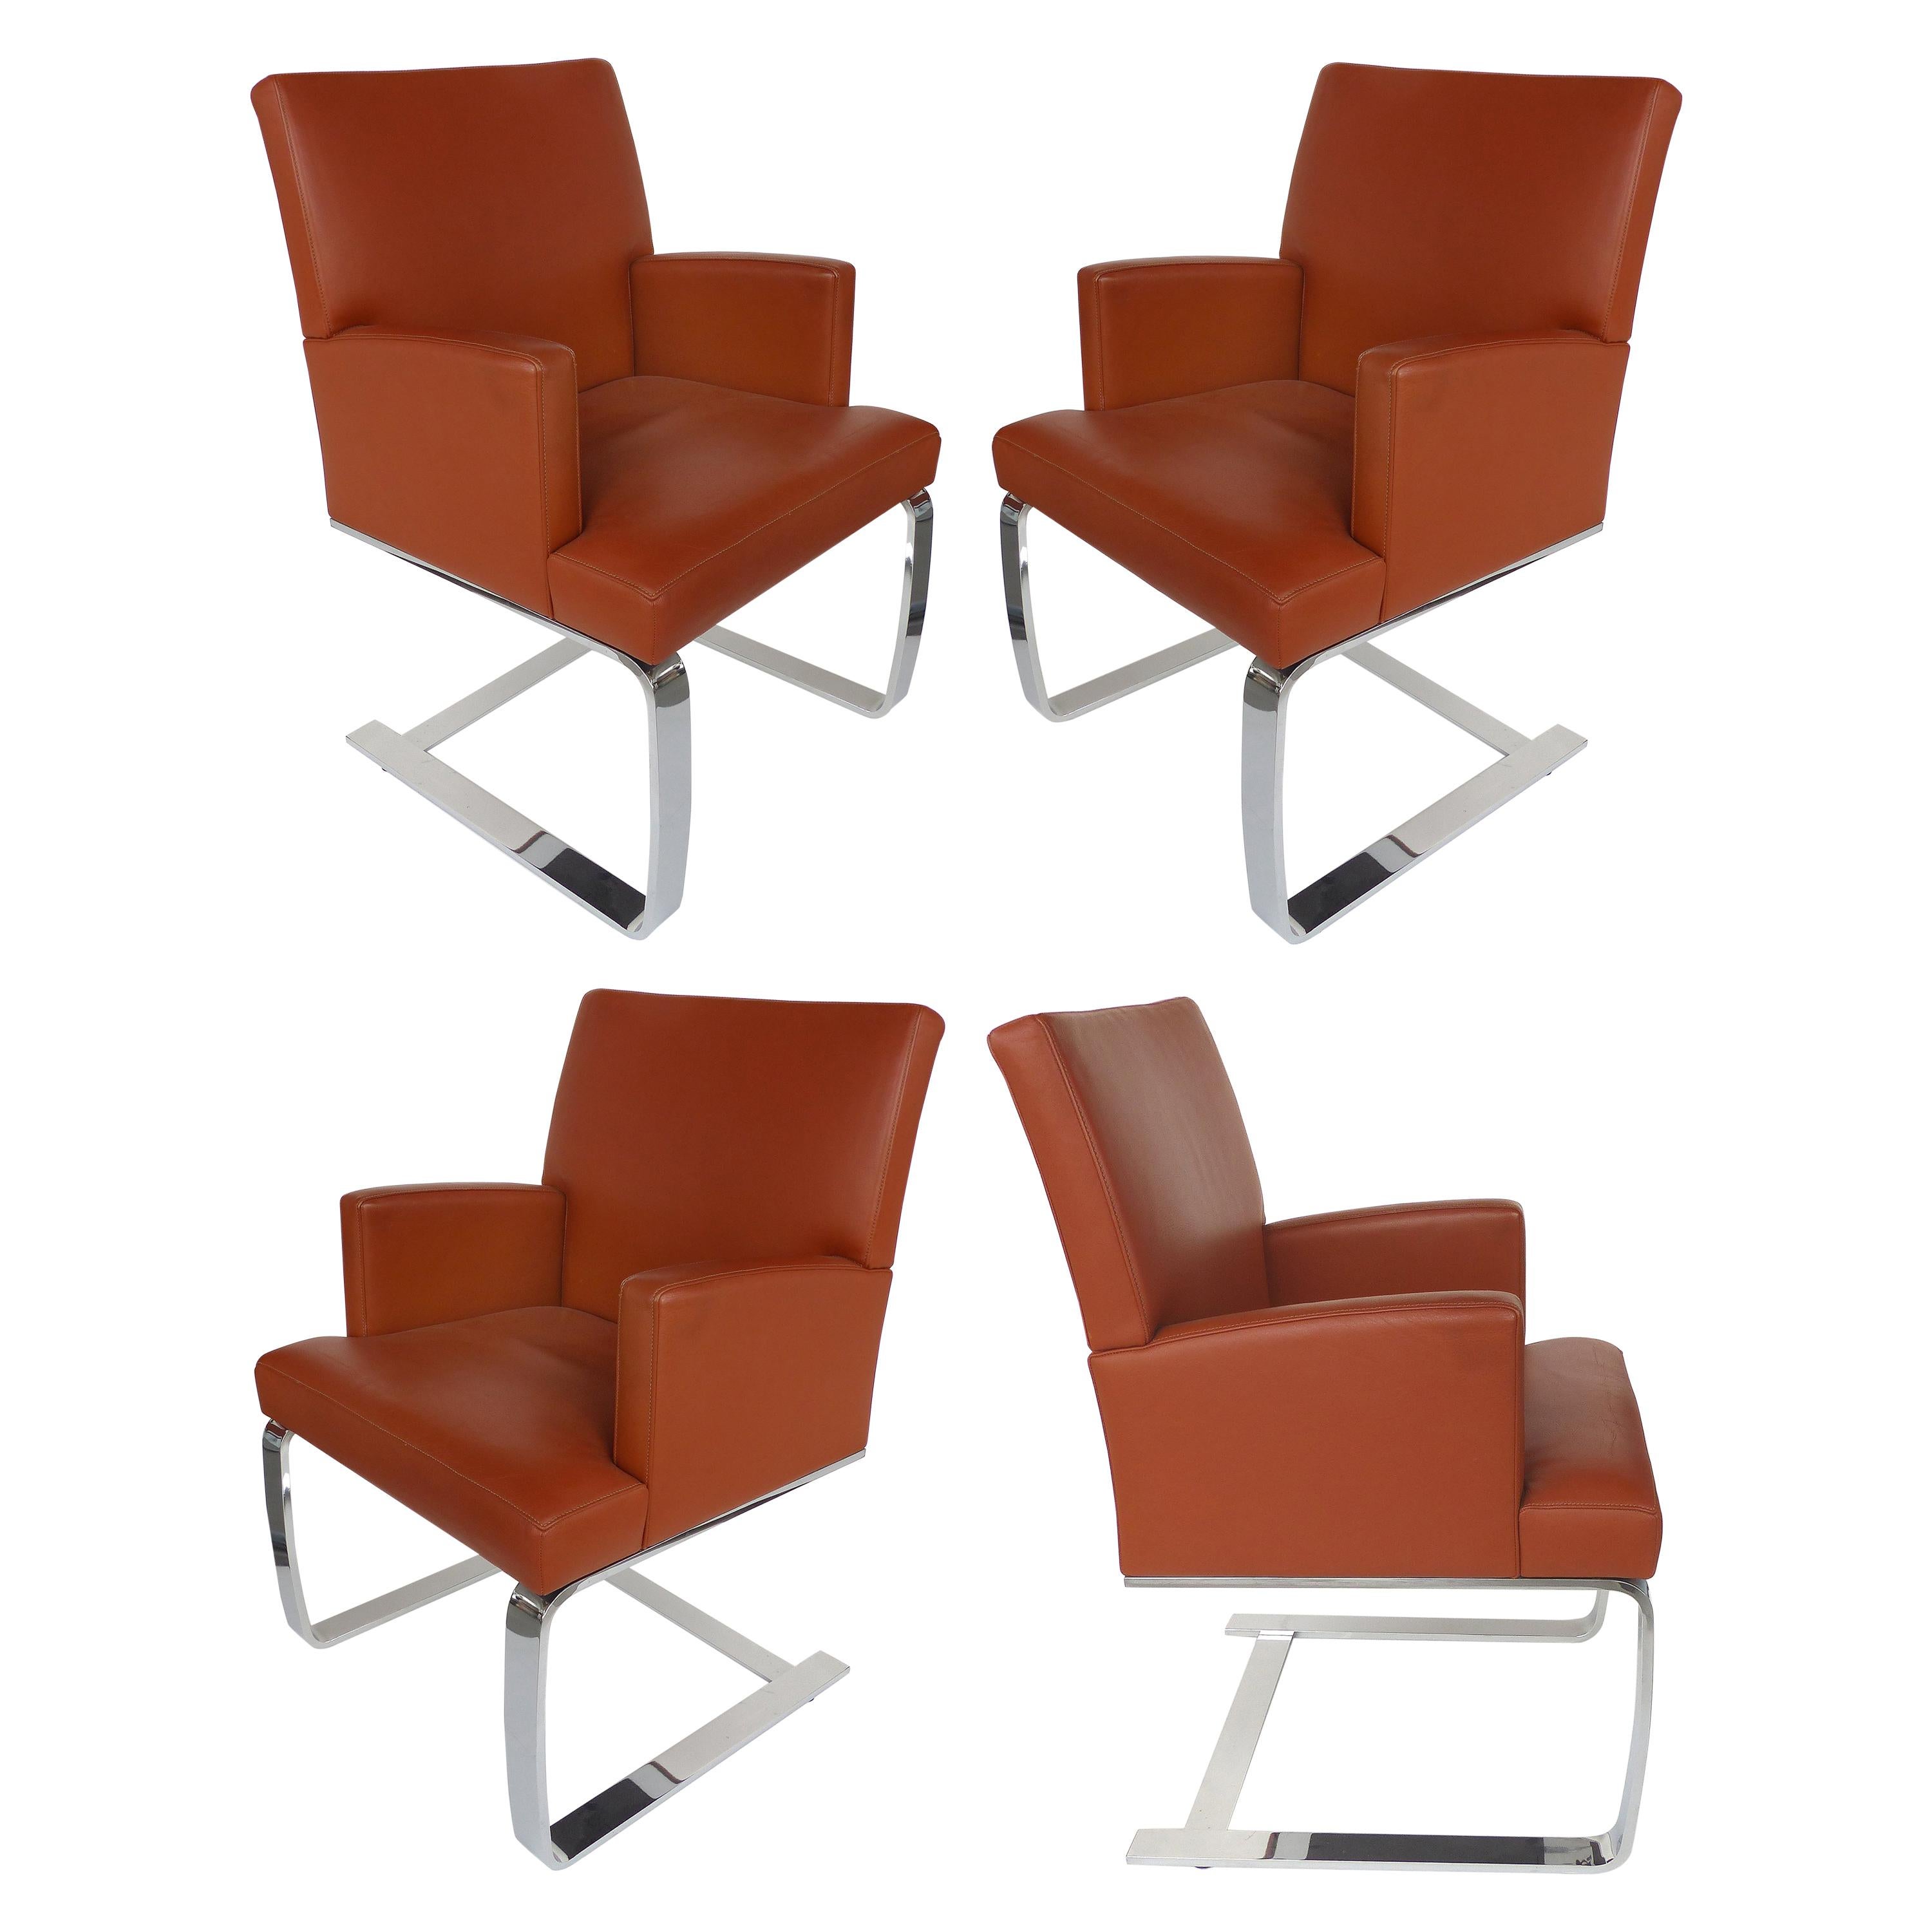 De Sede of Switzerland Cantilevered Leather and Stainless Steel Chairs, '4'